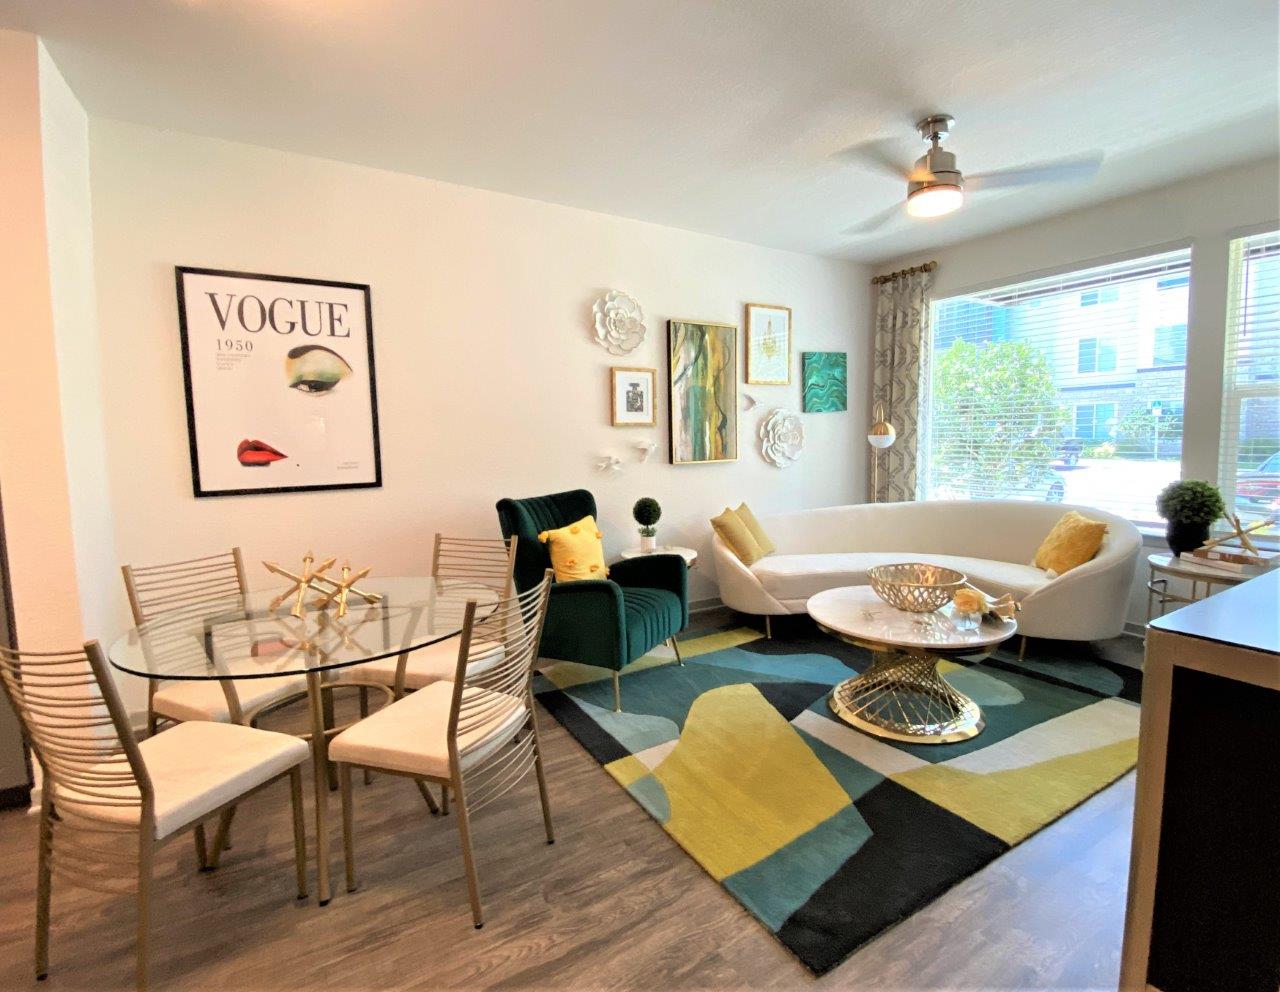 The Addison at Universal Boulevard One Bedroom Model Gallery living room and dining area